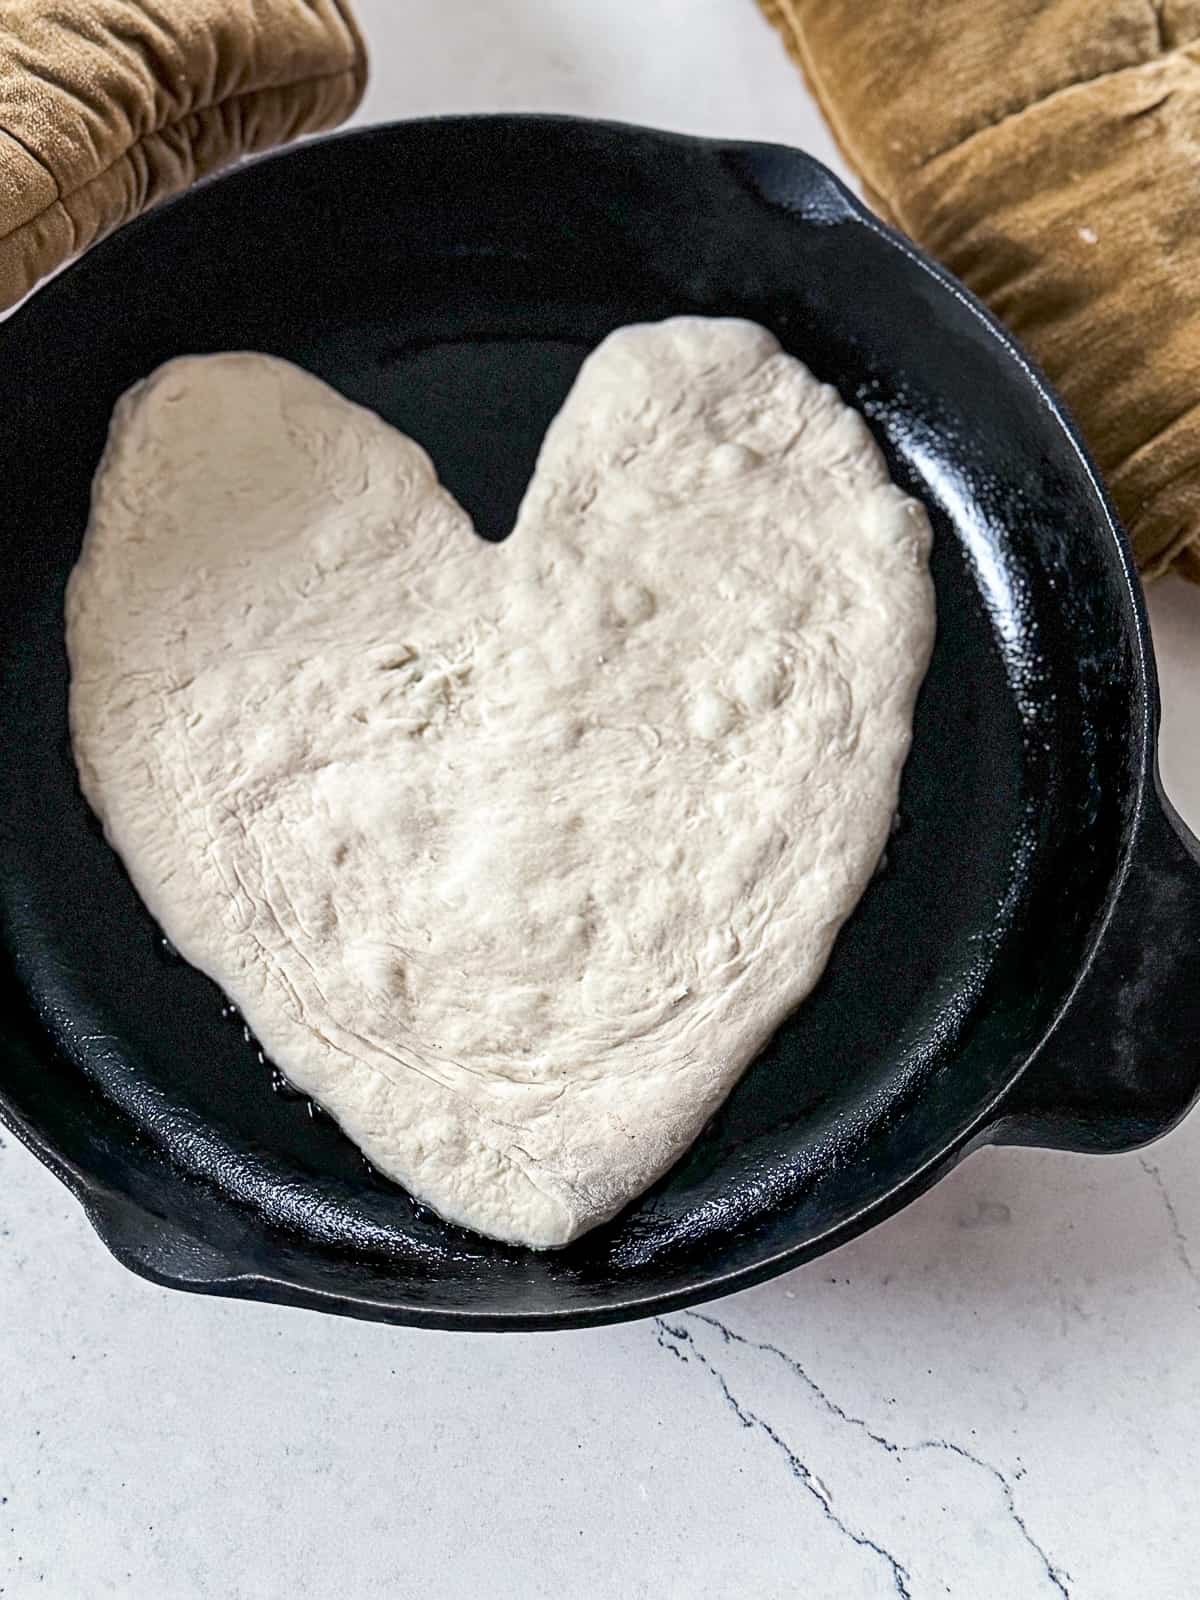 Heart Shaped Pizza Dough in cast iron skillet